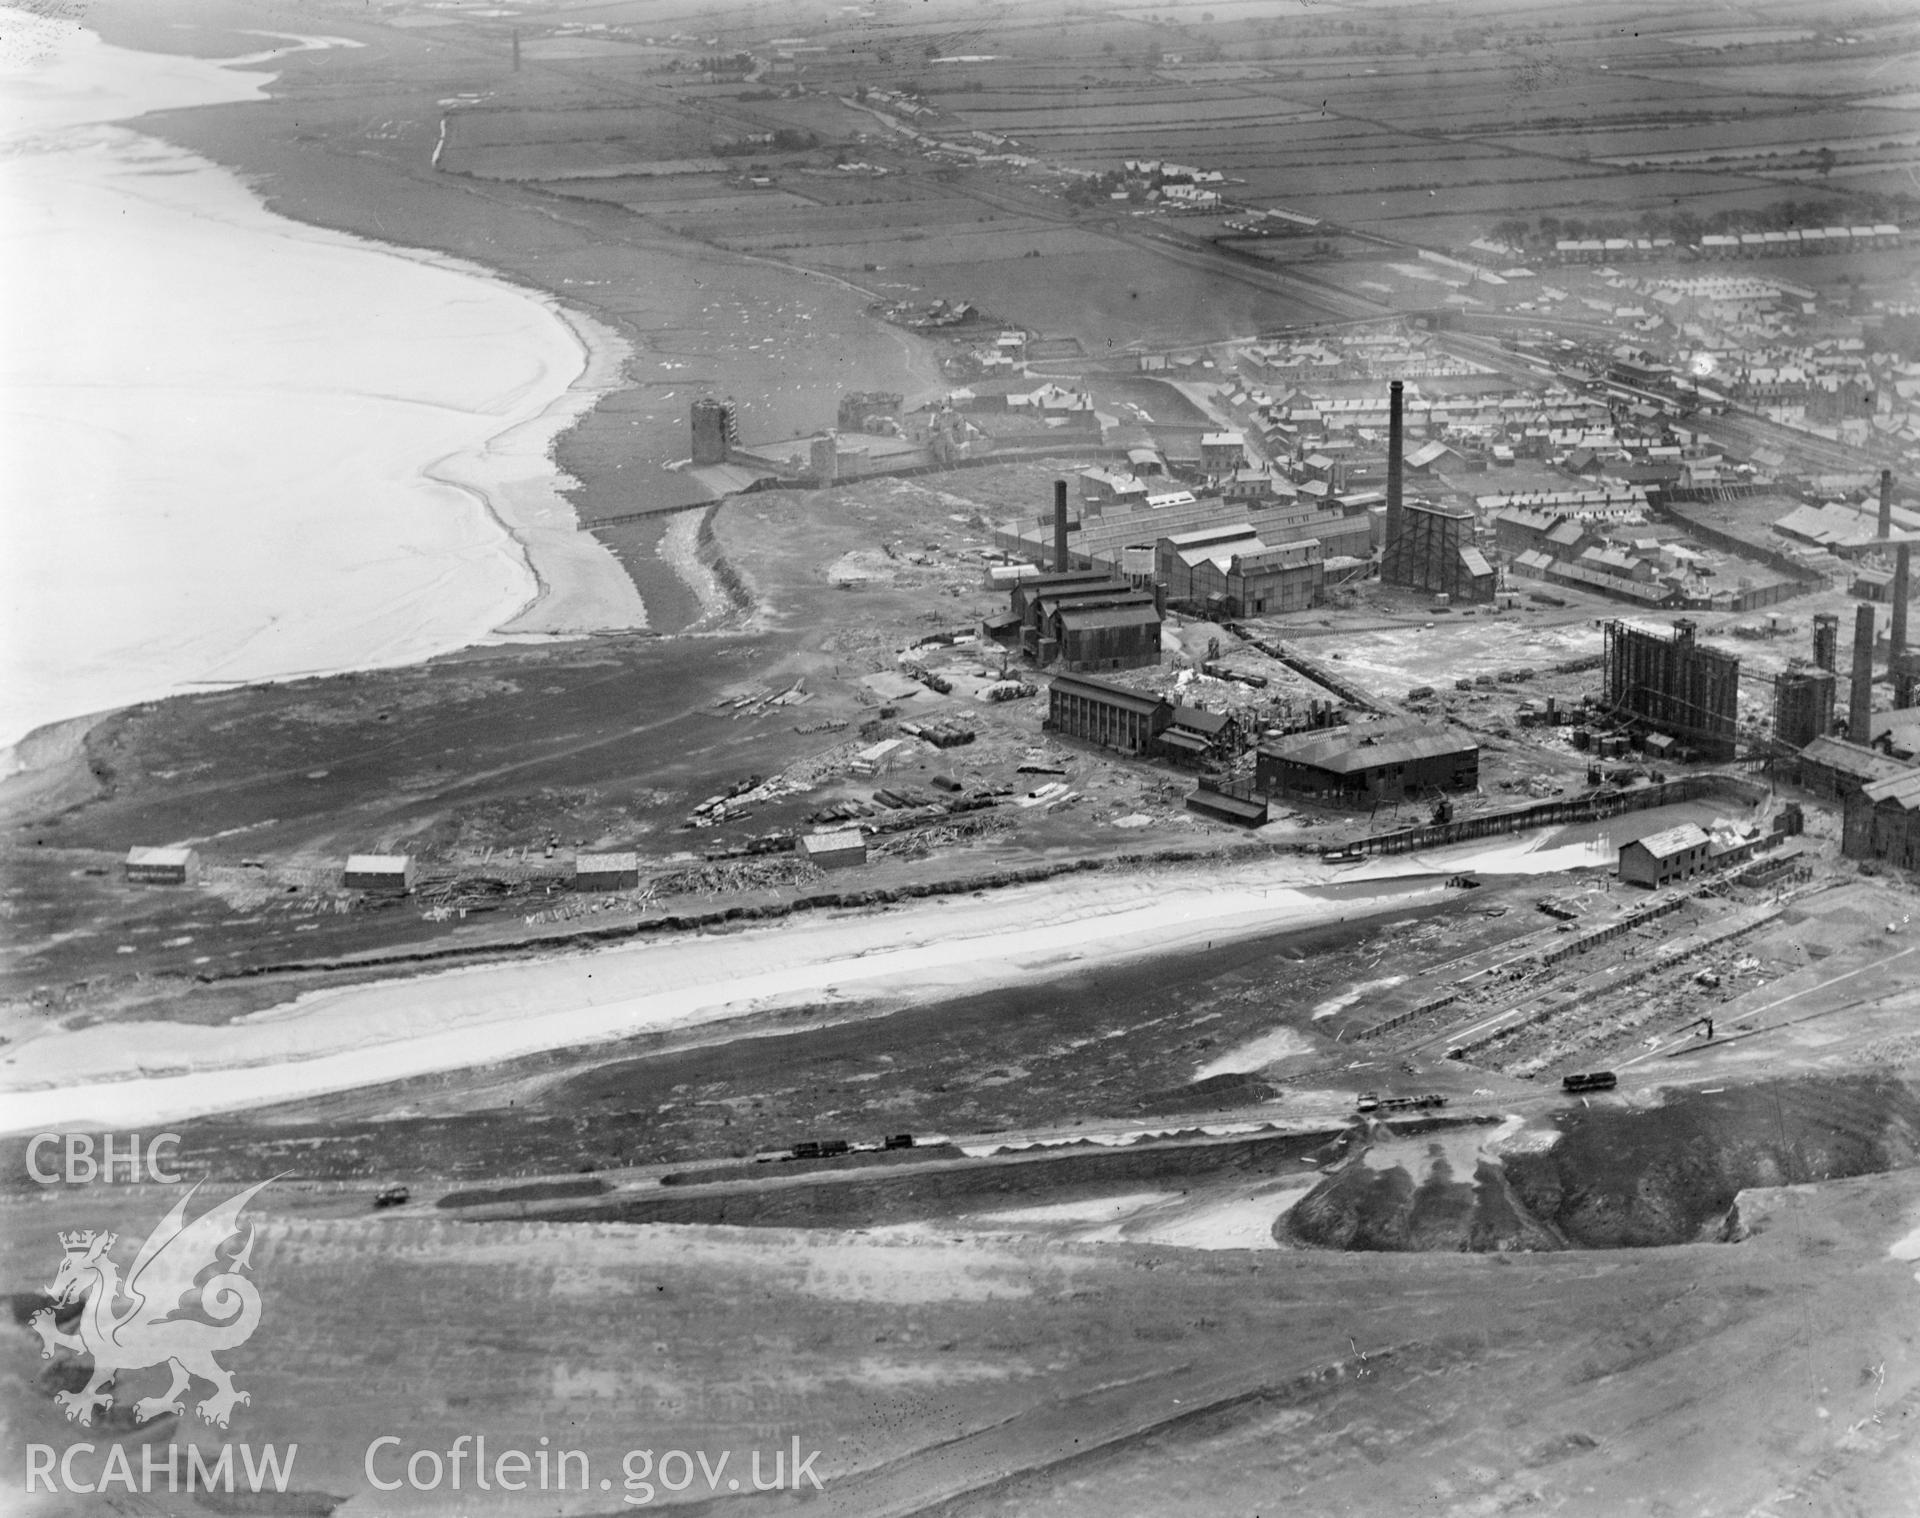 View of Flint showing the Courtaulds factory, oblique aerial view. 5?x4? black and white glass plate negative.